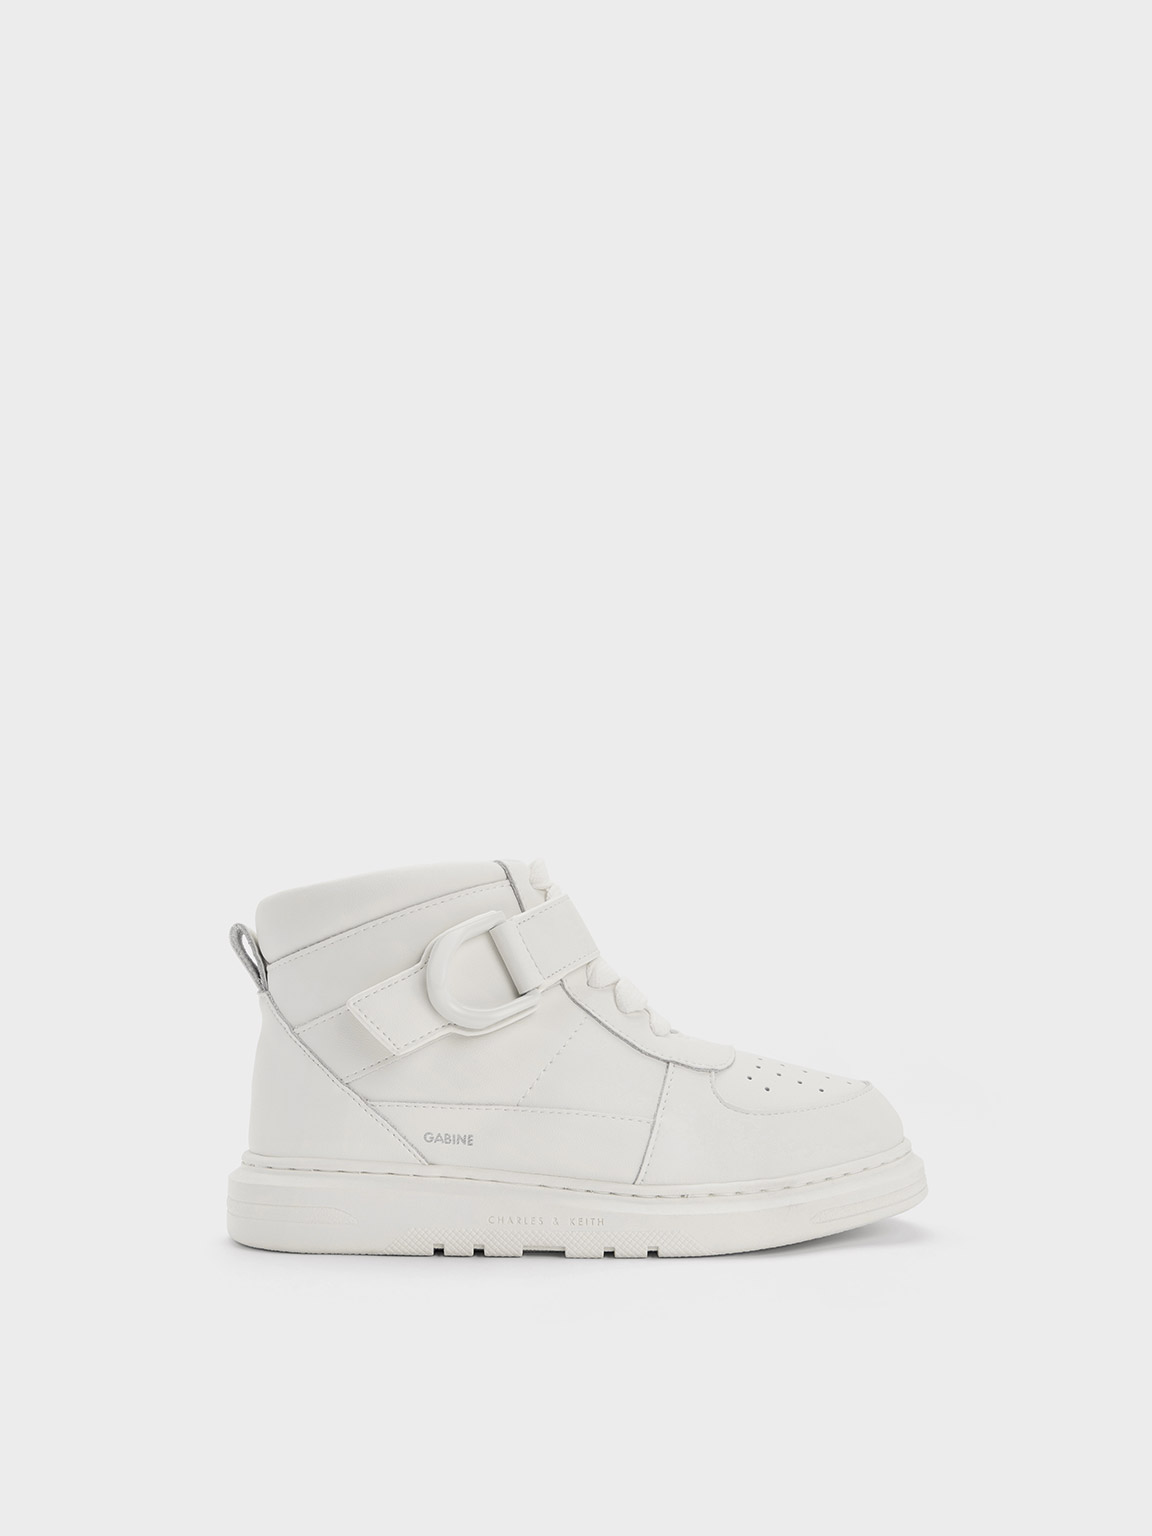 Charles & Keith - Girls' Gabine Leather High-top Sneaker In White